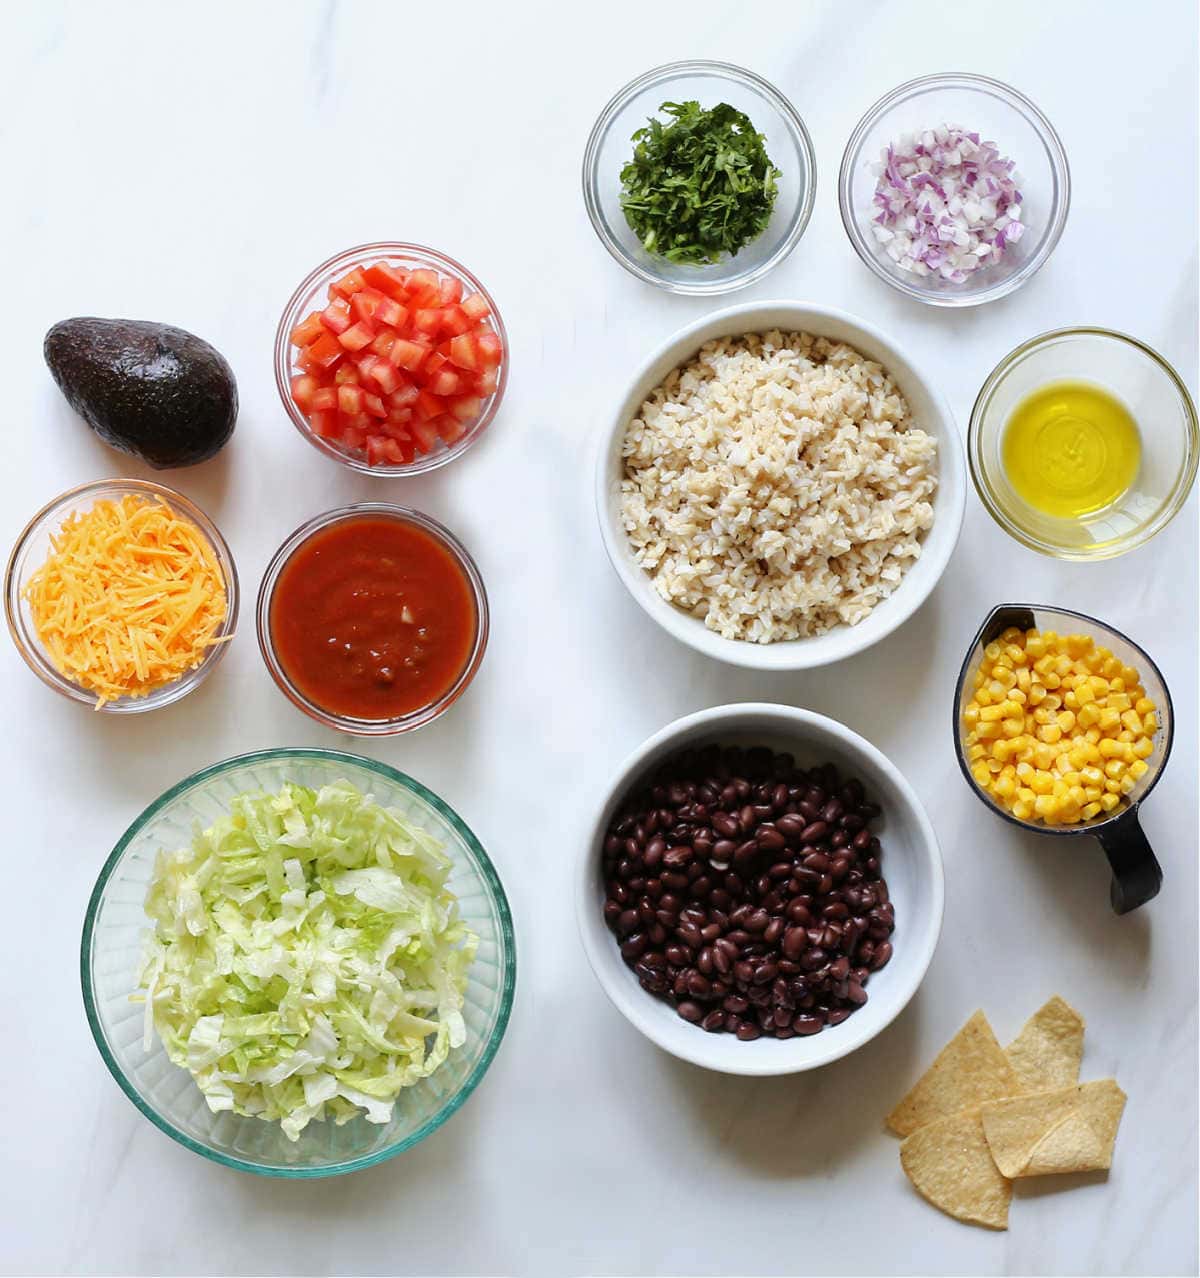 Vegetarian taco salad ingredients in bowls: black beans, rice, salsa, tomatoes, lettuce, cilantro, onion, chips.